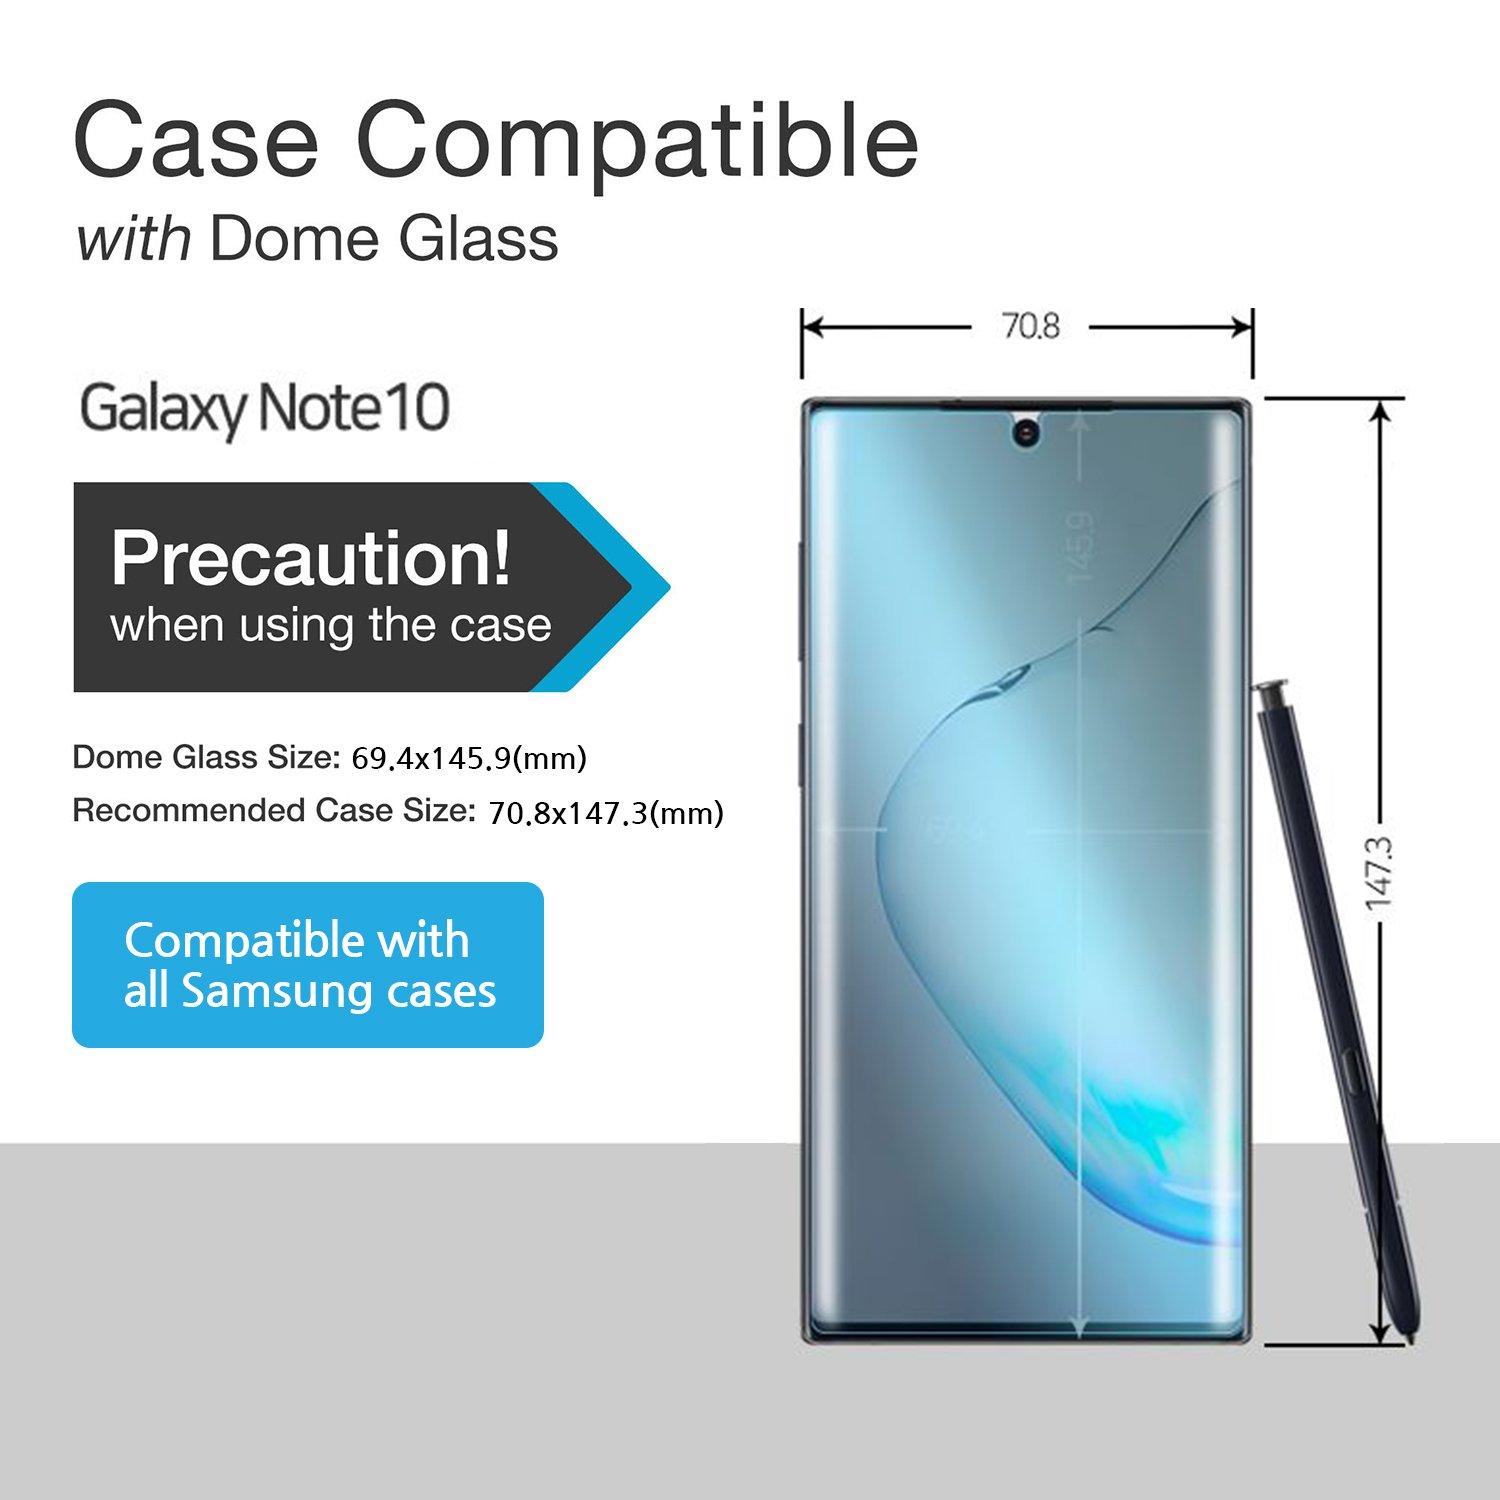 Dome Glass Screen Protector Samsung Galaxy Note 10